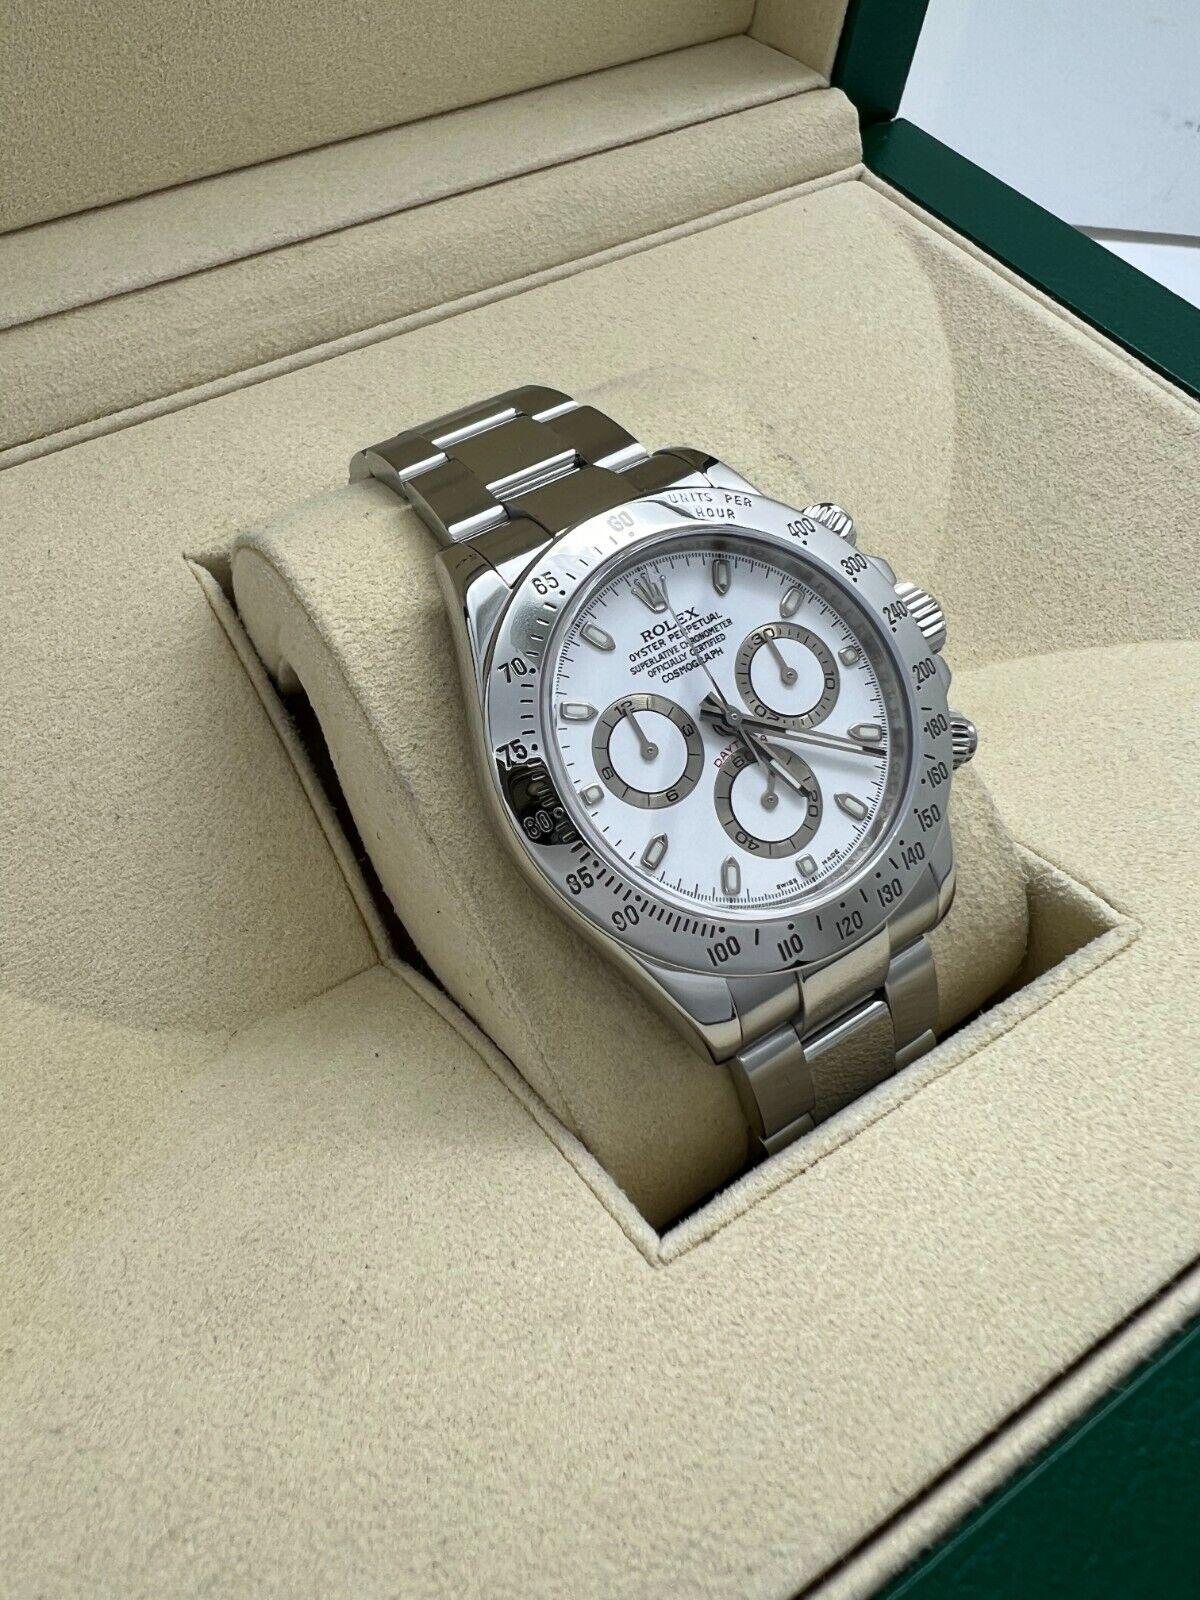 Rolex 116520 Daytona White Dial Stainless Steel Box Paper OPEN CARD 5